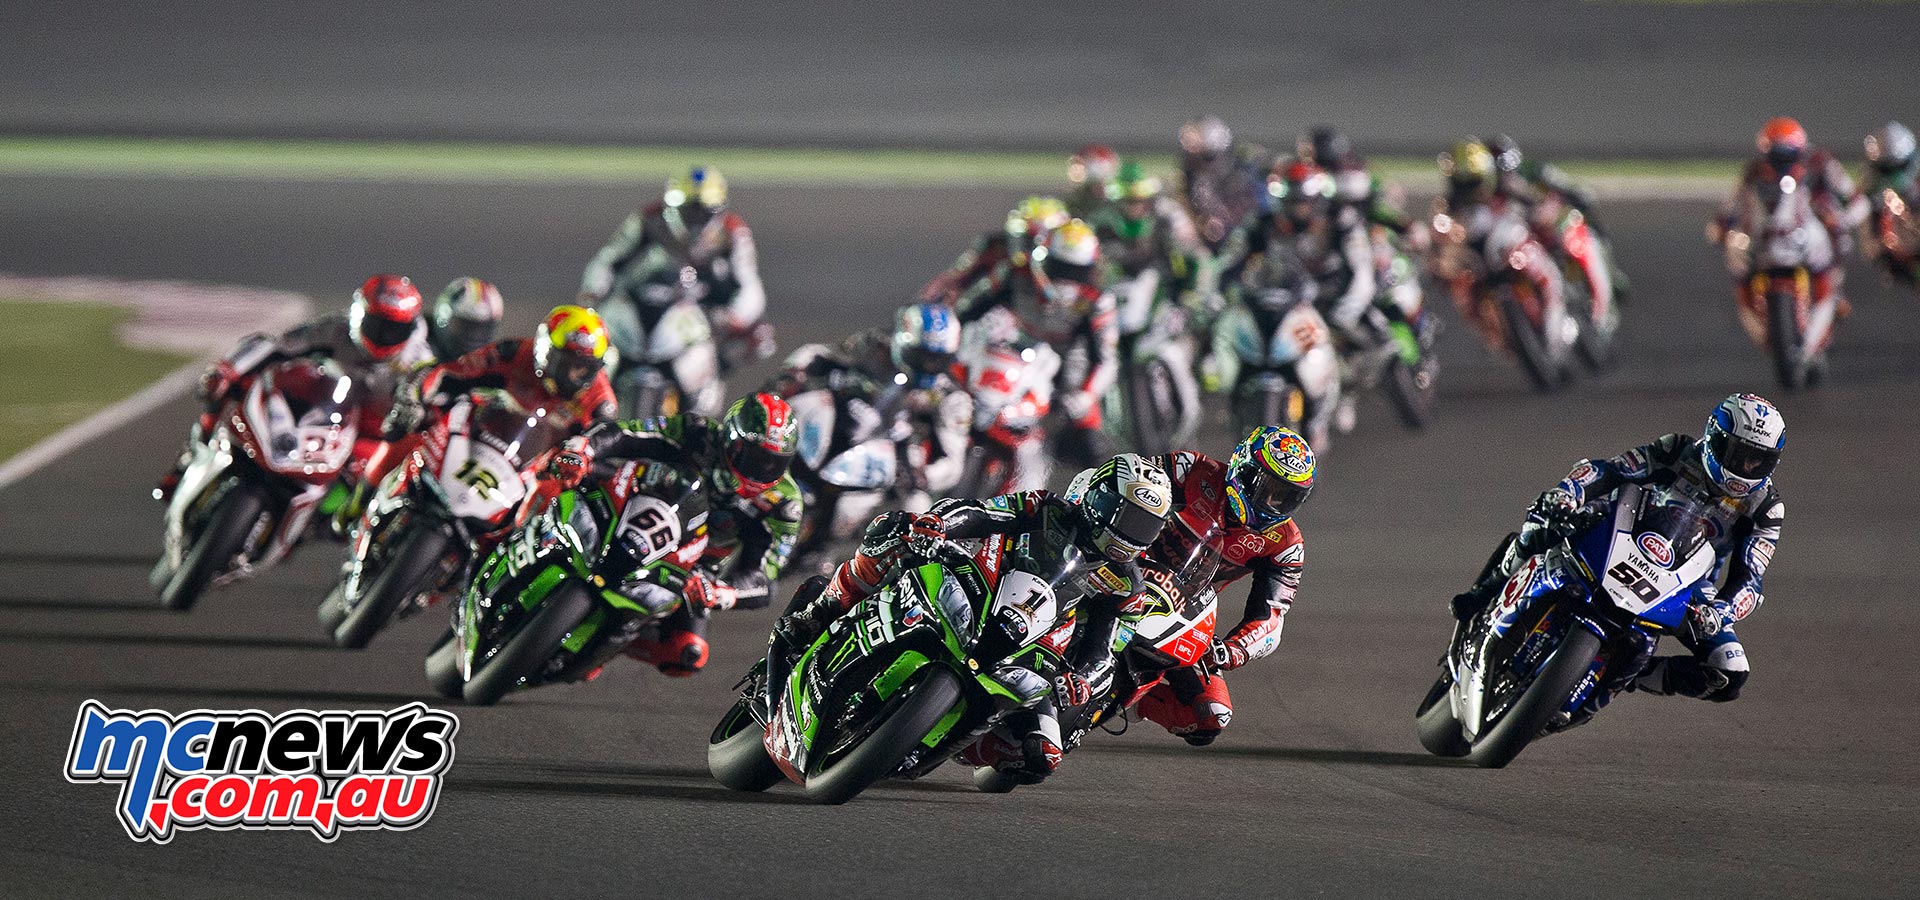 Fox Sports retains MotoGP and WorldSBK rights for 2017 MCNews